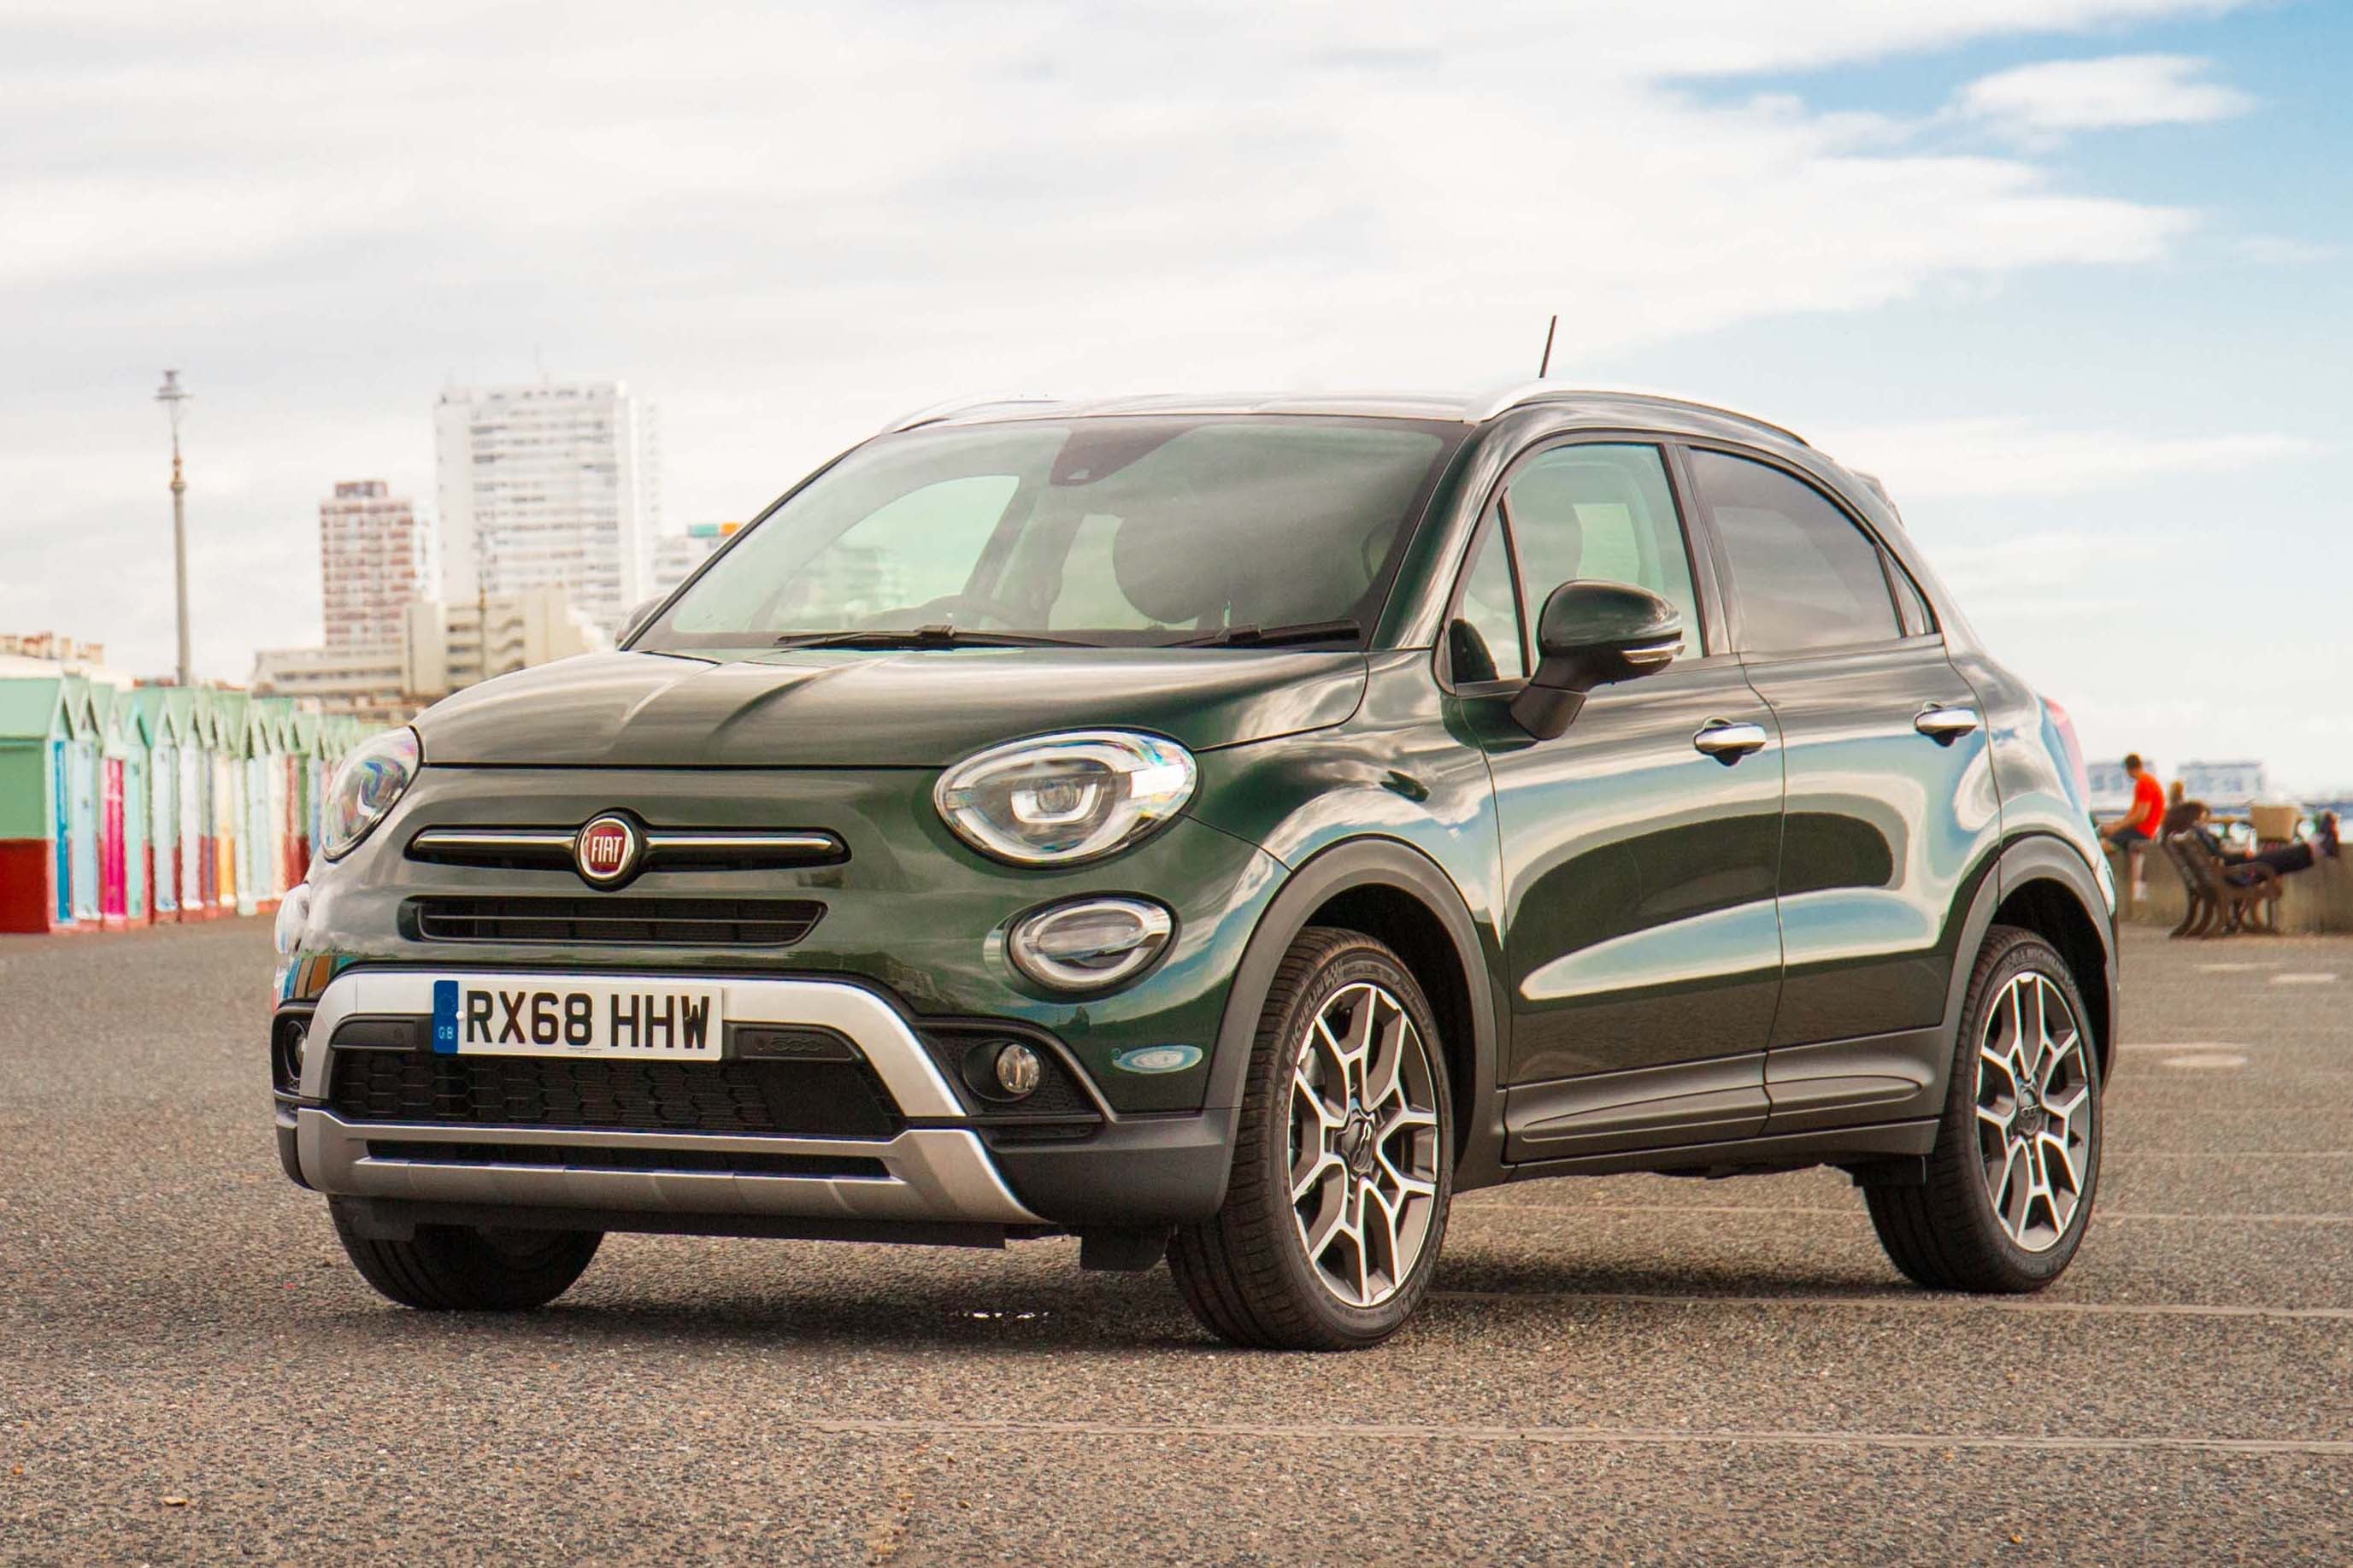 New Fiat 500X review: the crossover gets a facelift